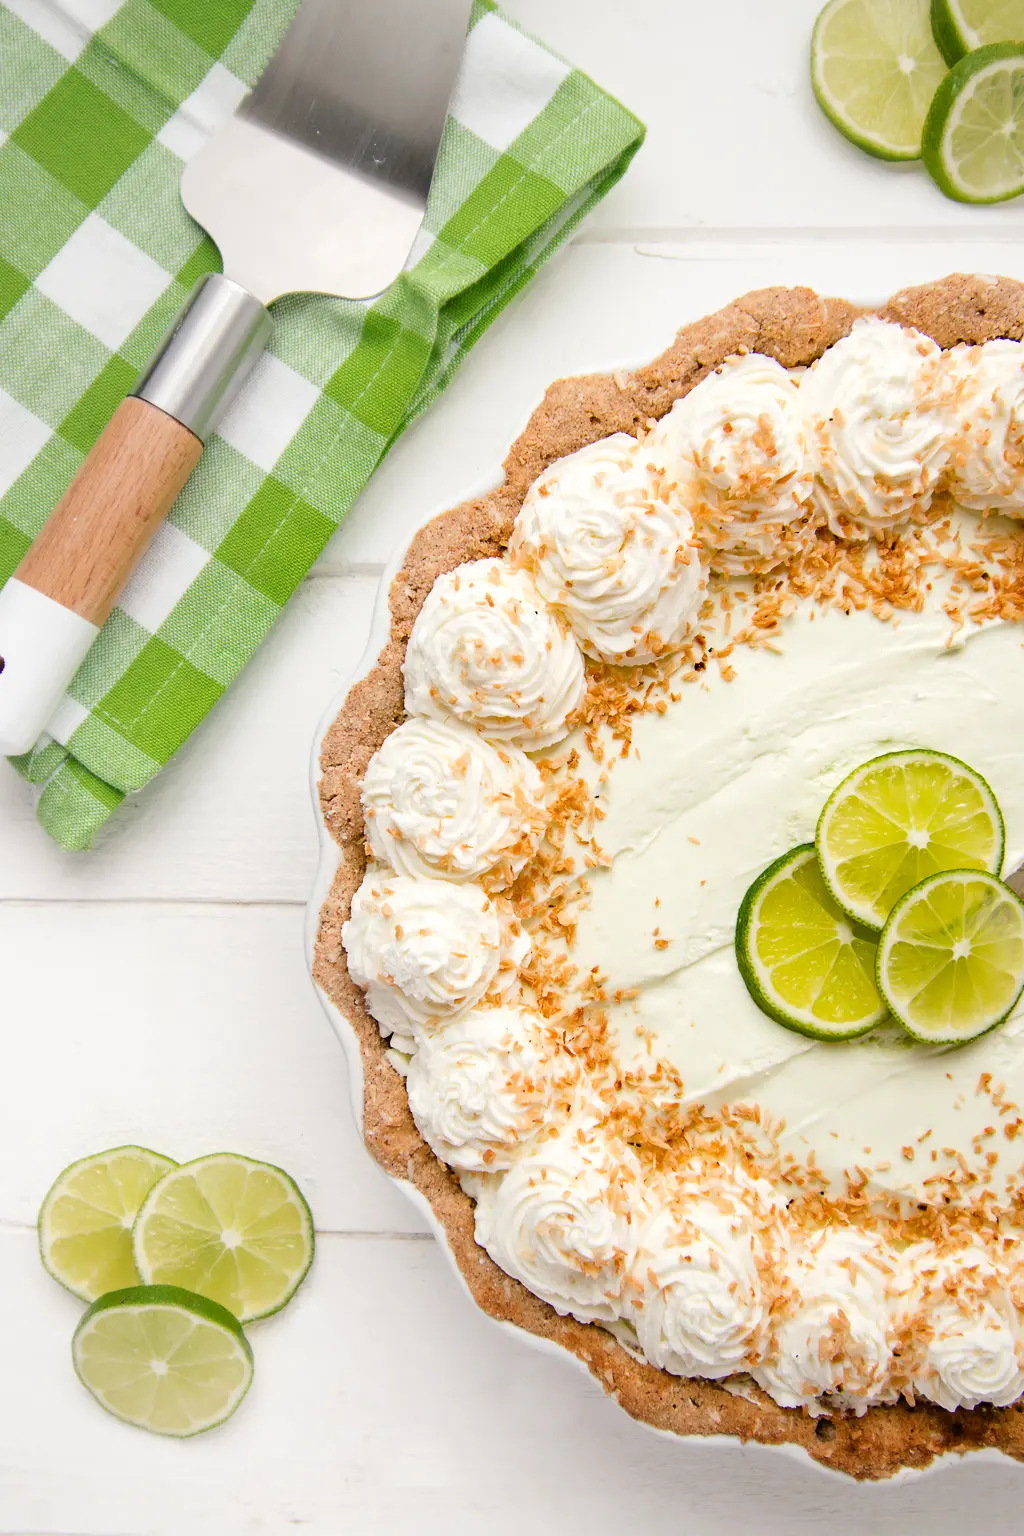 A low carb key lime pie with whipped cream and toasted coconut on a white back ground with a green gingham napkin and sliced limes